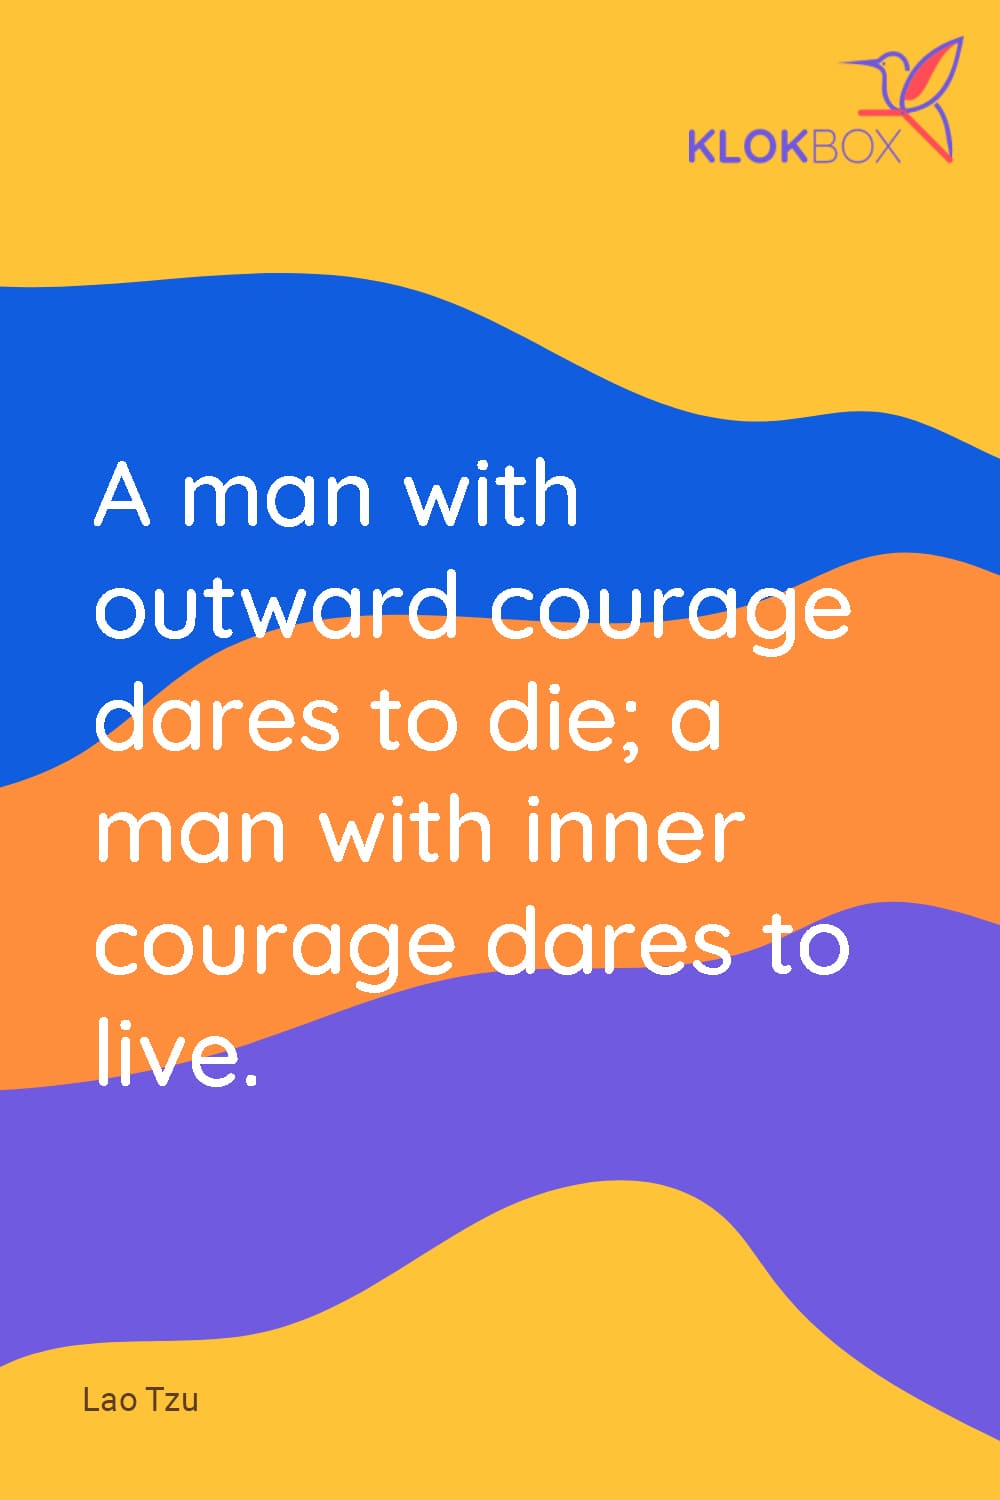 a man with outward courage dates to die; a man with inner courage dared to live. Lao Tzu